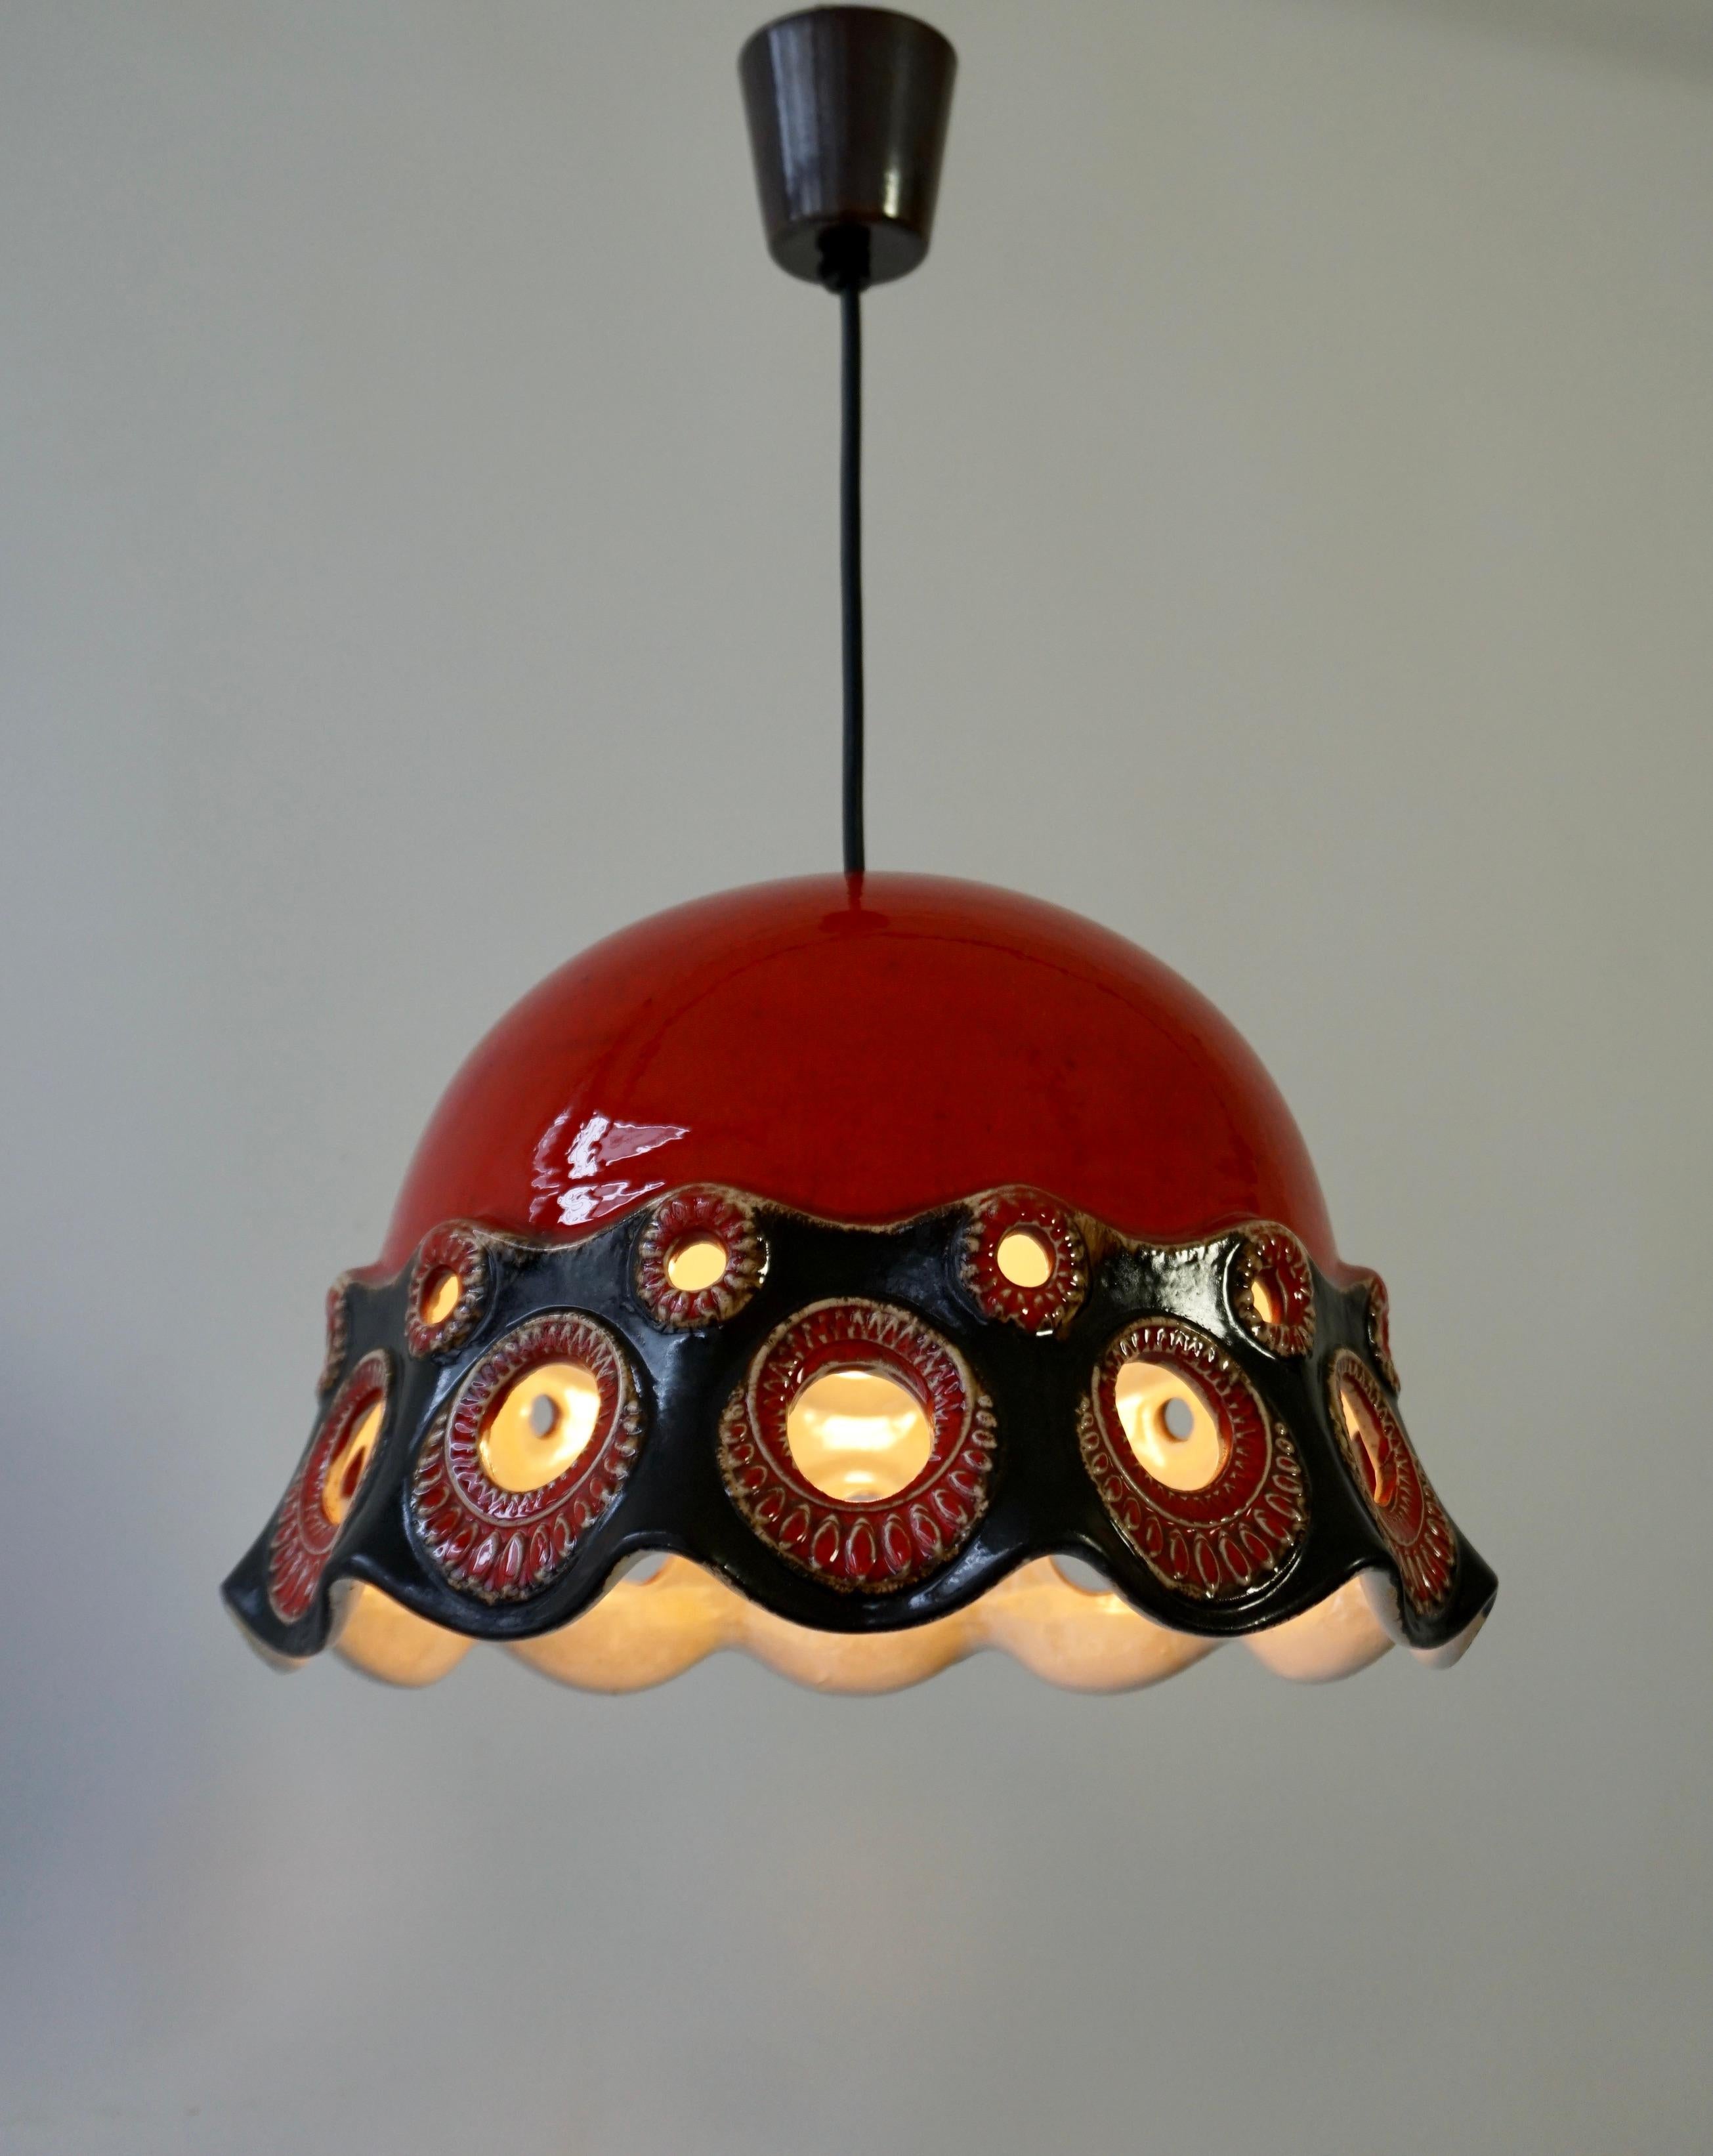 Ceramic ceiling lamp - ''PAN. Goebel'' - Germany, 1970s

Ceramic lamp with an openwork lampshade which when turned on gives a nice effect to the eye.
Object with red and black glazing.

The lamp has one socket for incandescent lamps with screw base